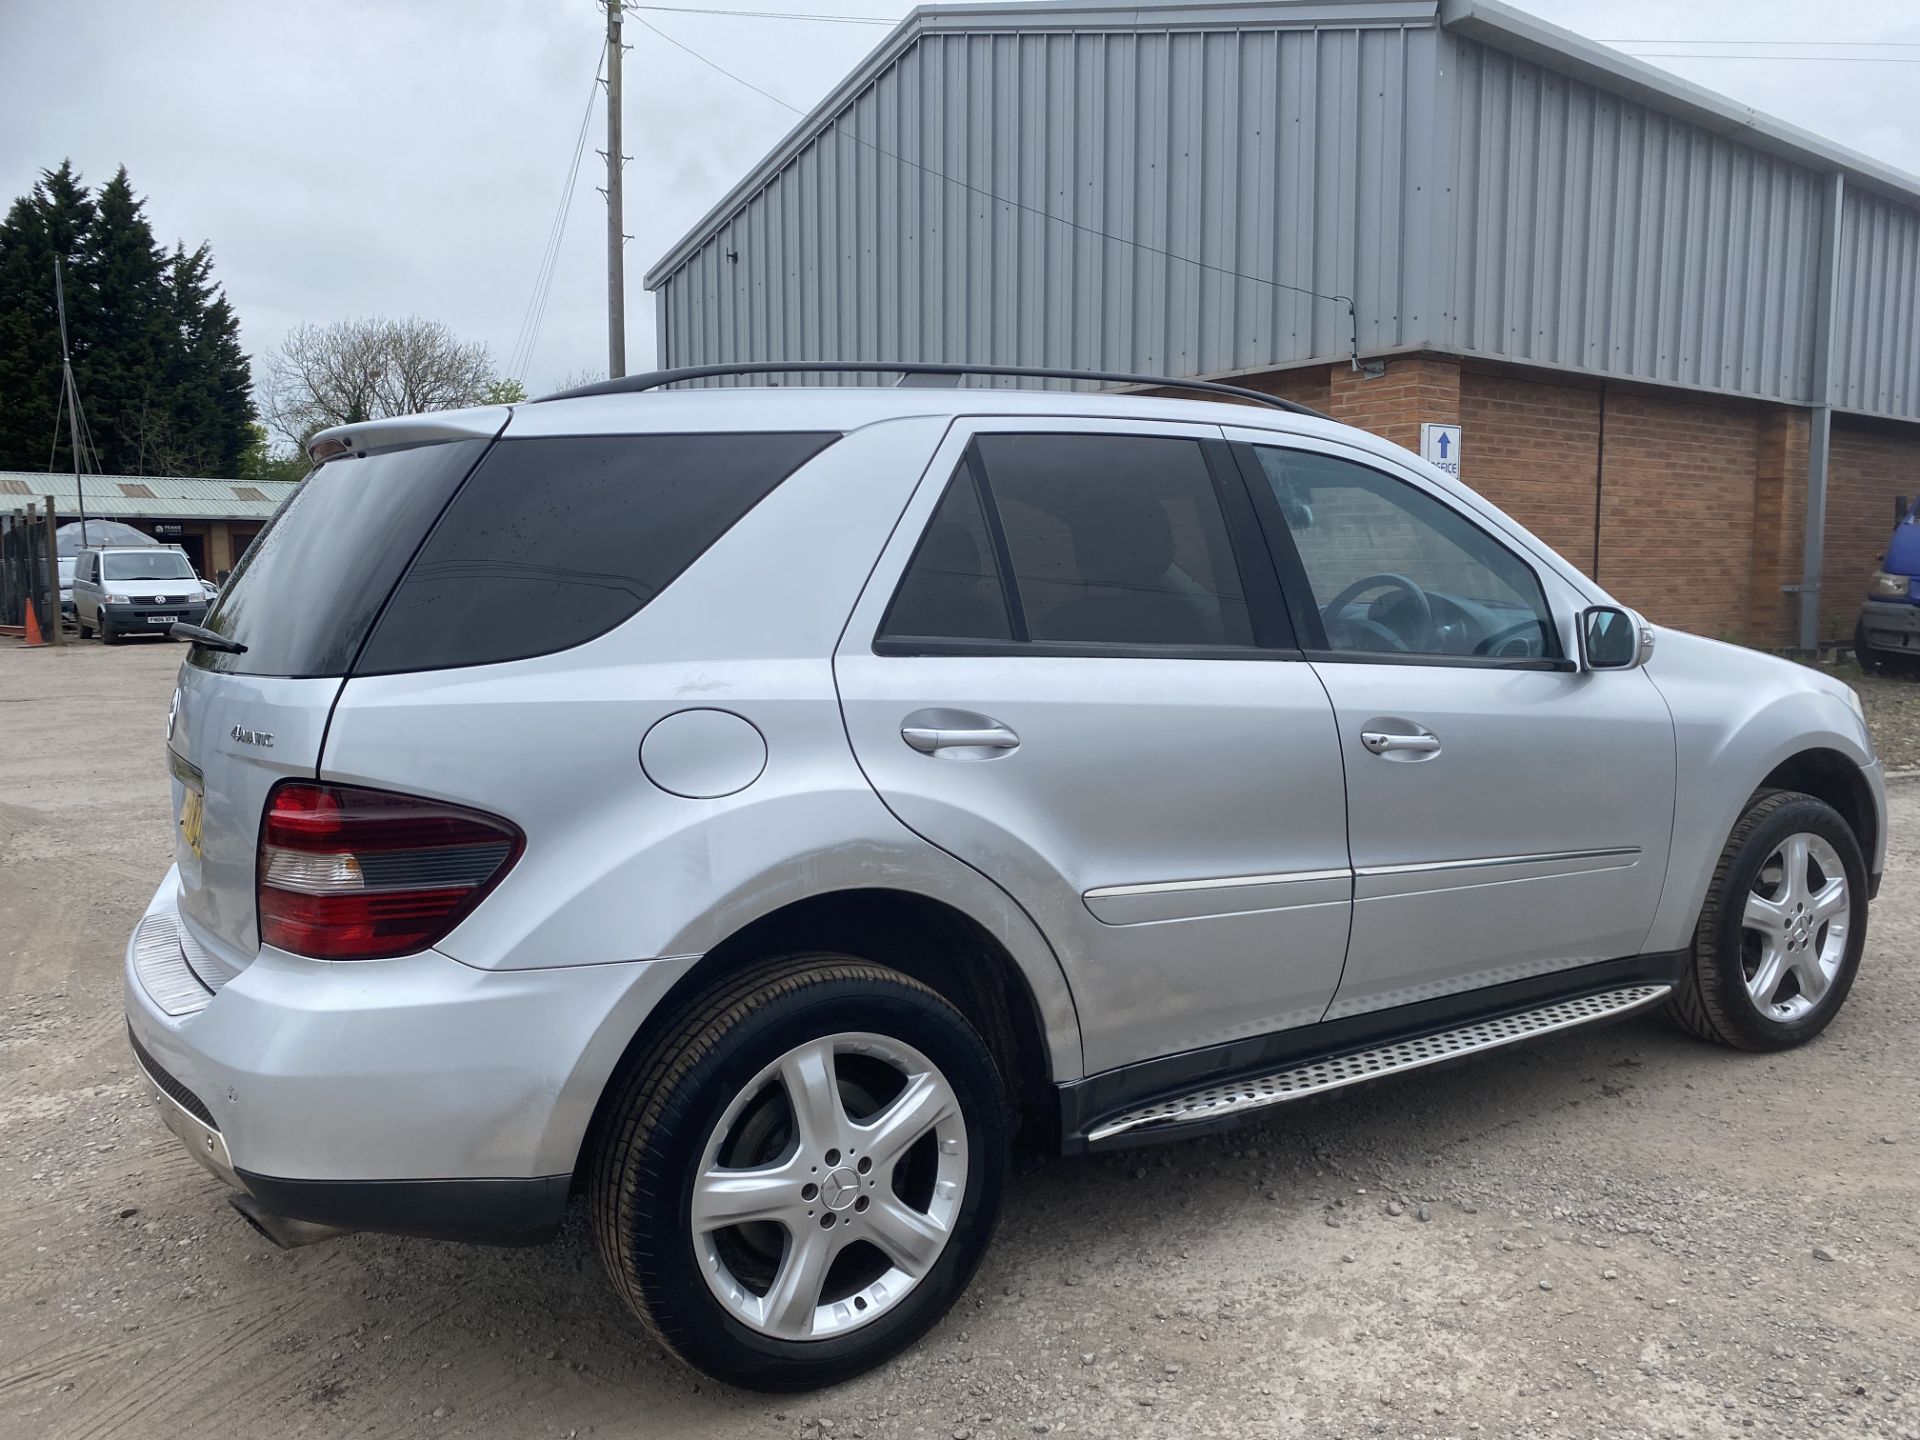 (Reserve Met) Mercedes ML280 Cdi (SPORT) Auto 3.0v6 Diesel - 2008 Reg - Only 94000 Miles Fsh Leather - Image 7 of 21